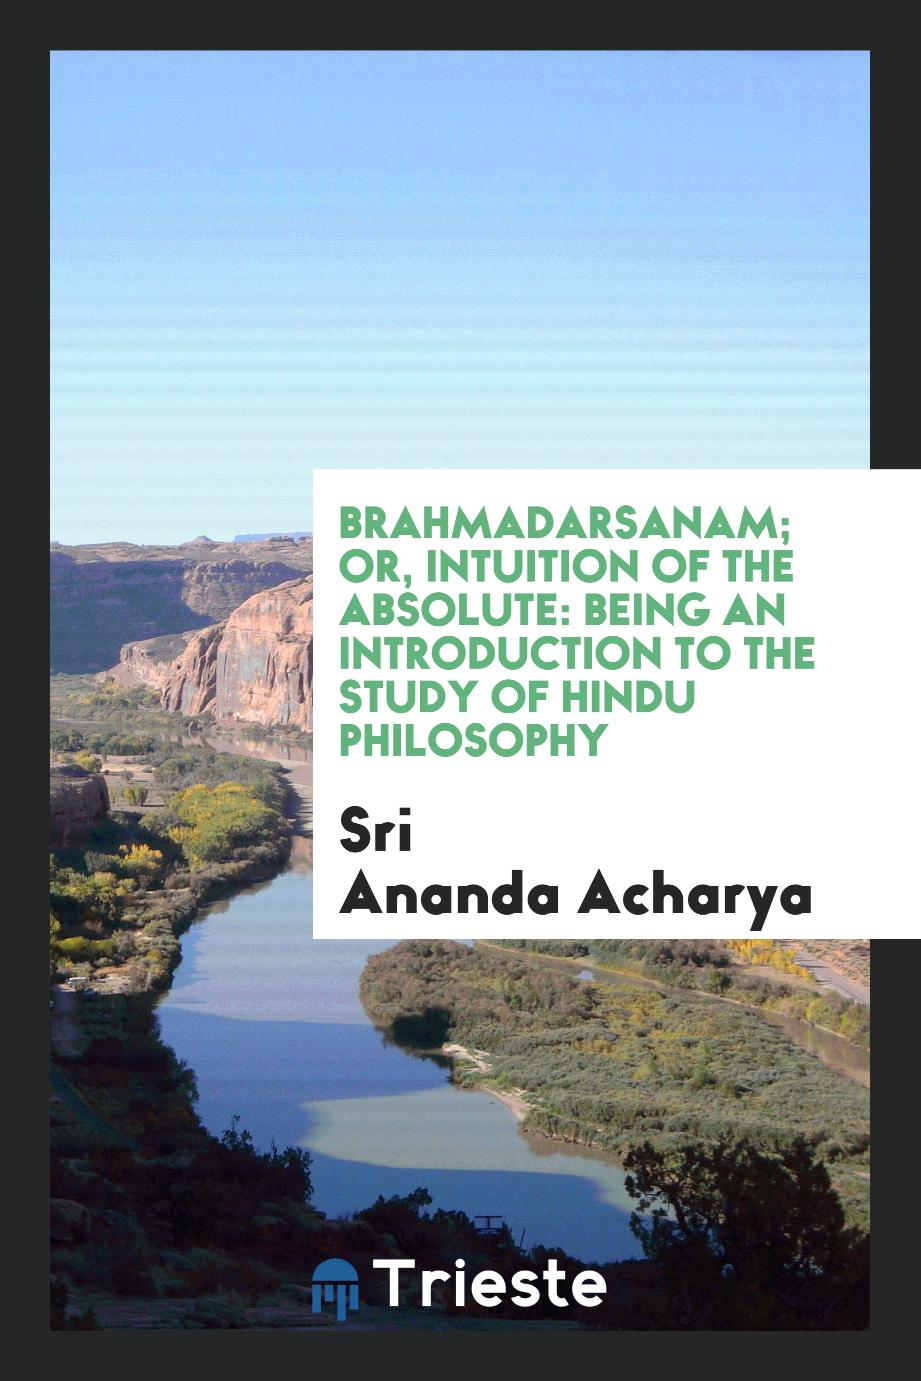 Brahmadarsanam; or, Intuition of the absolute: Being an Introduction to the Study of Hindu Philosophy